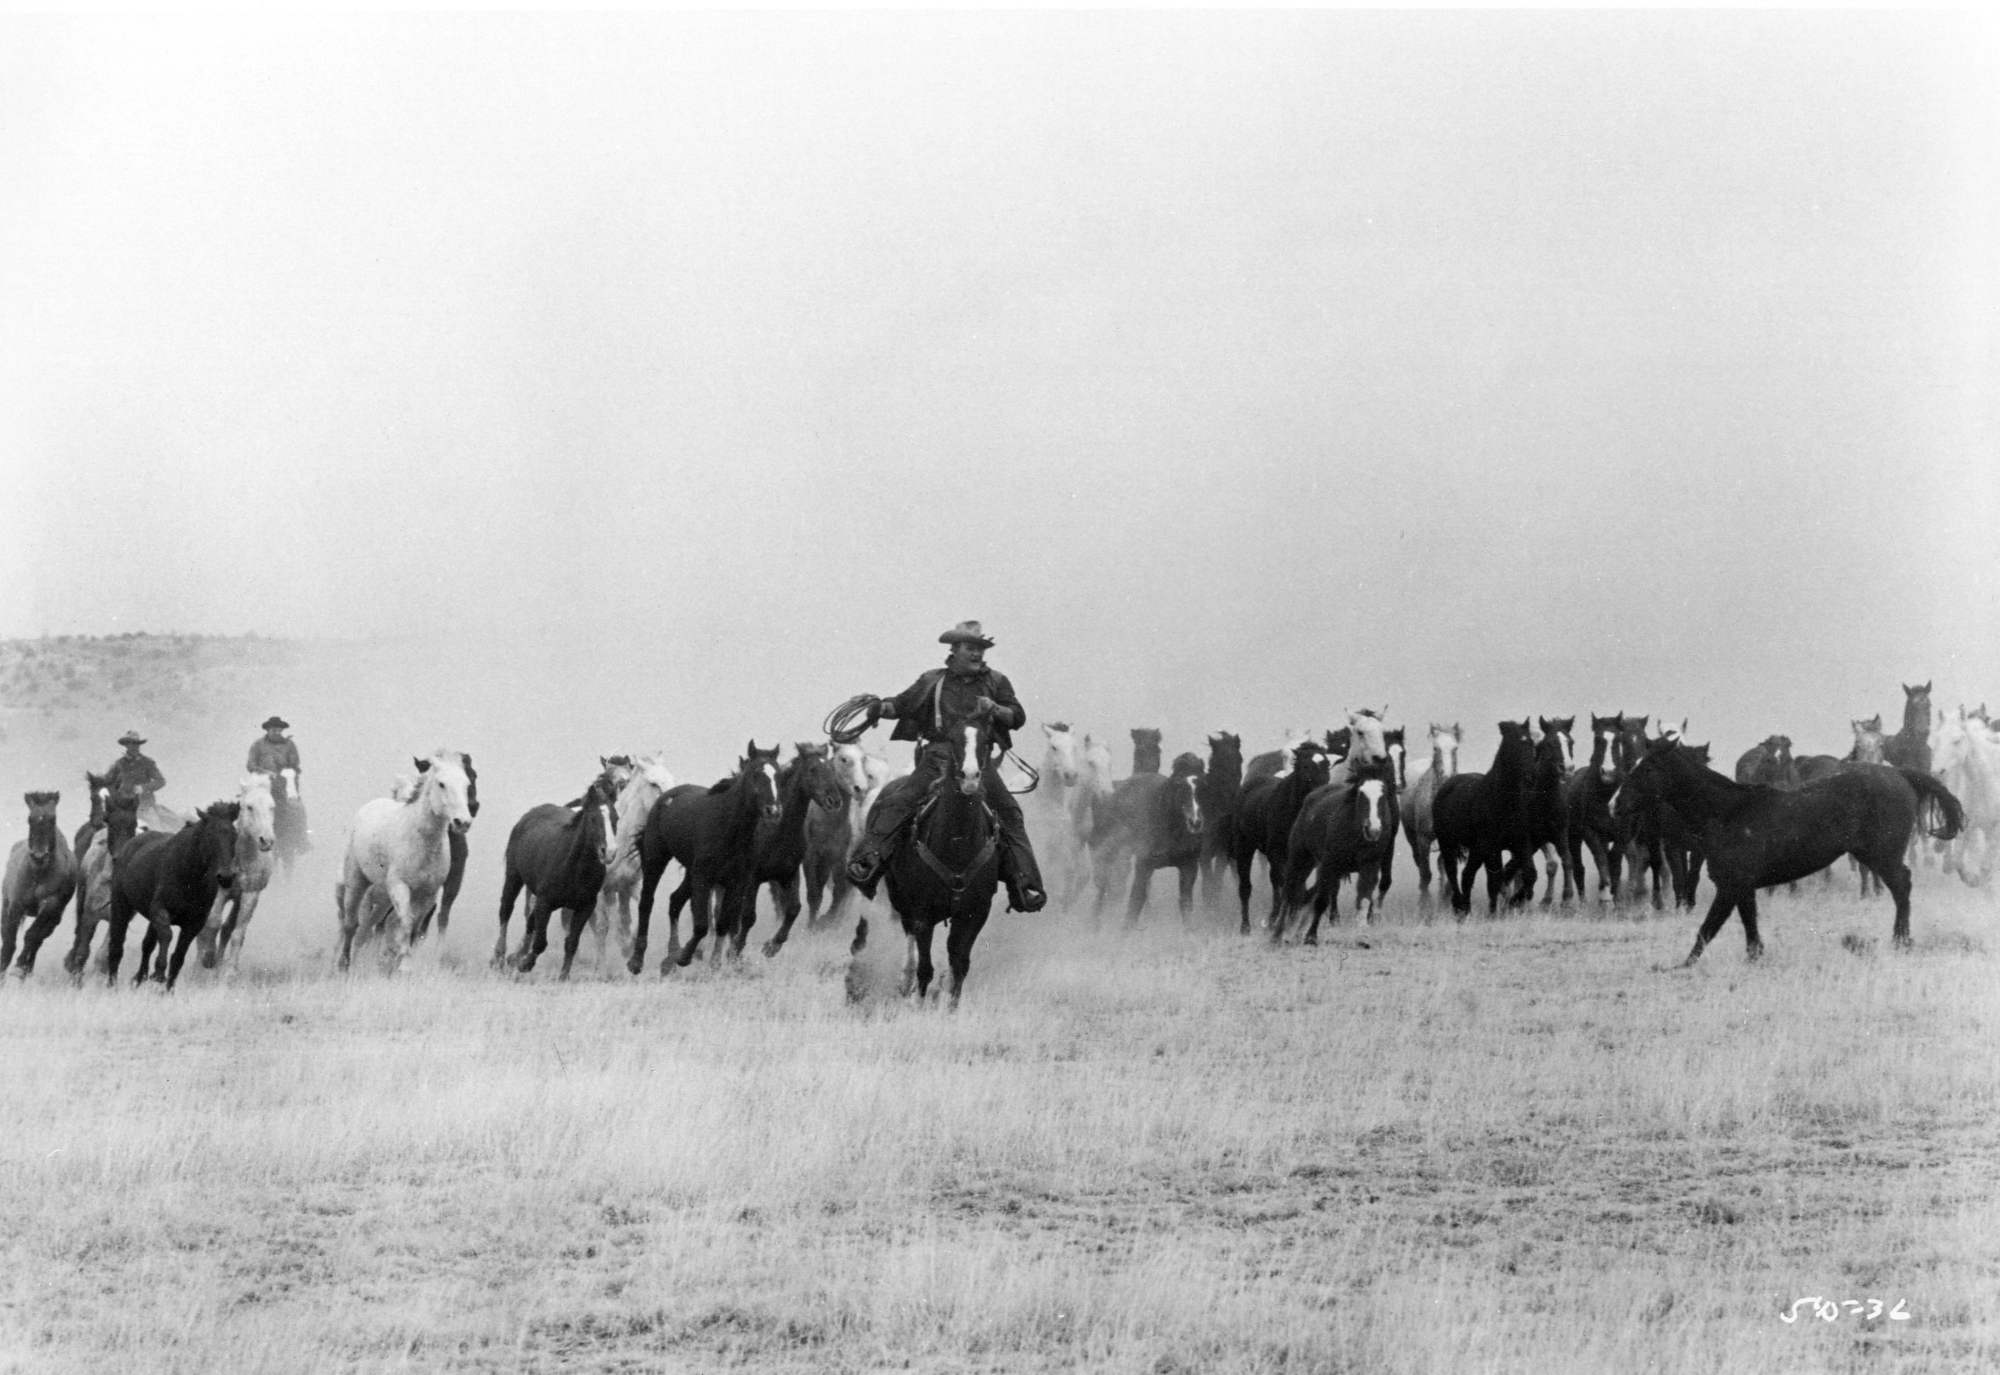 'The Cowboys' John Wayne as Wil Andersen riding his horse in a field followed by a herd of other horses.